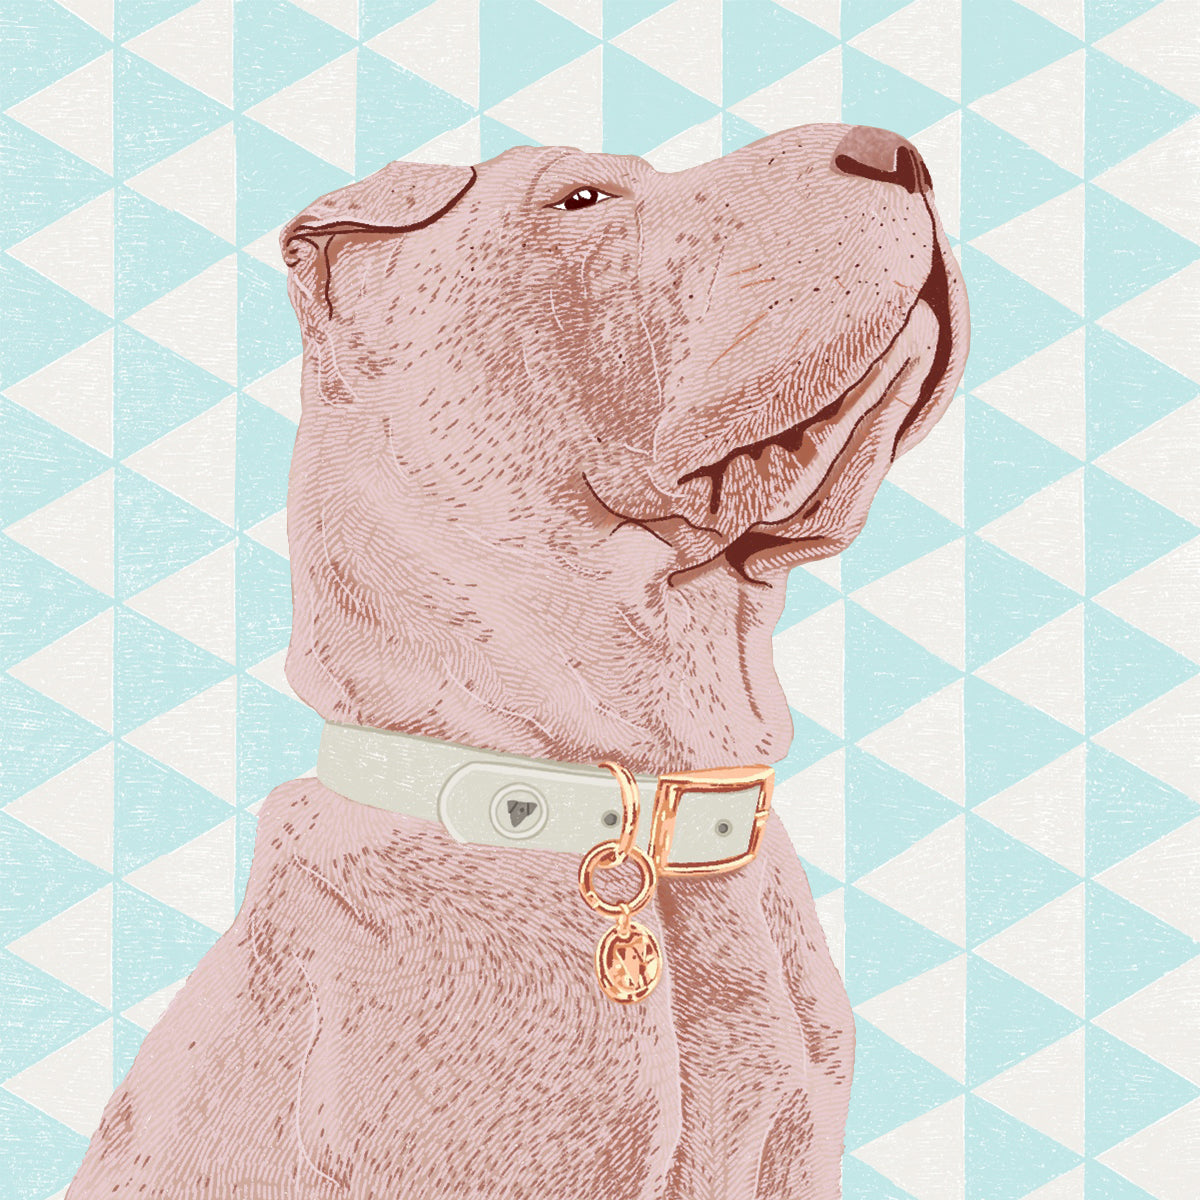 A digital portrait of Juno, a white Shar Pei, wearing a Valgray for Dogs luxury dog collar. The artwork shows Juno in a designer, 100% waterproof bone grey and yellow gold dog collar with tags on a blue patterned background.